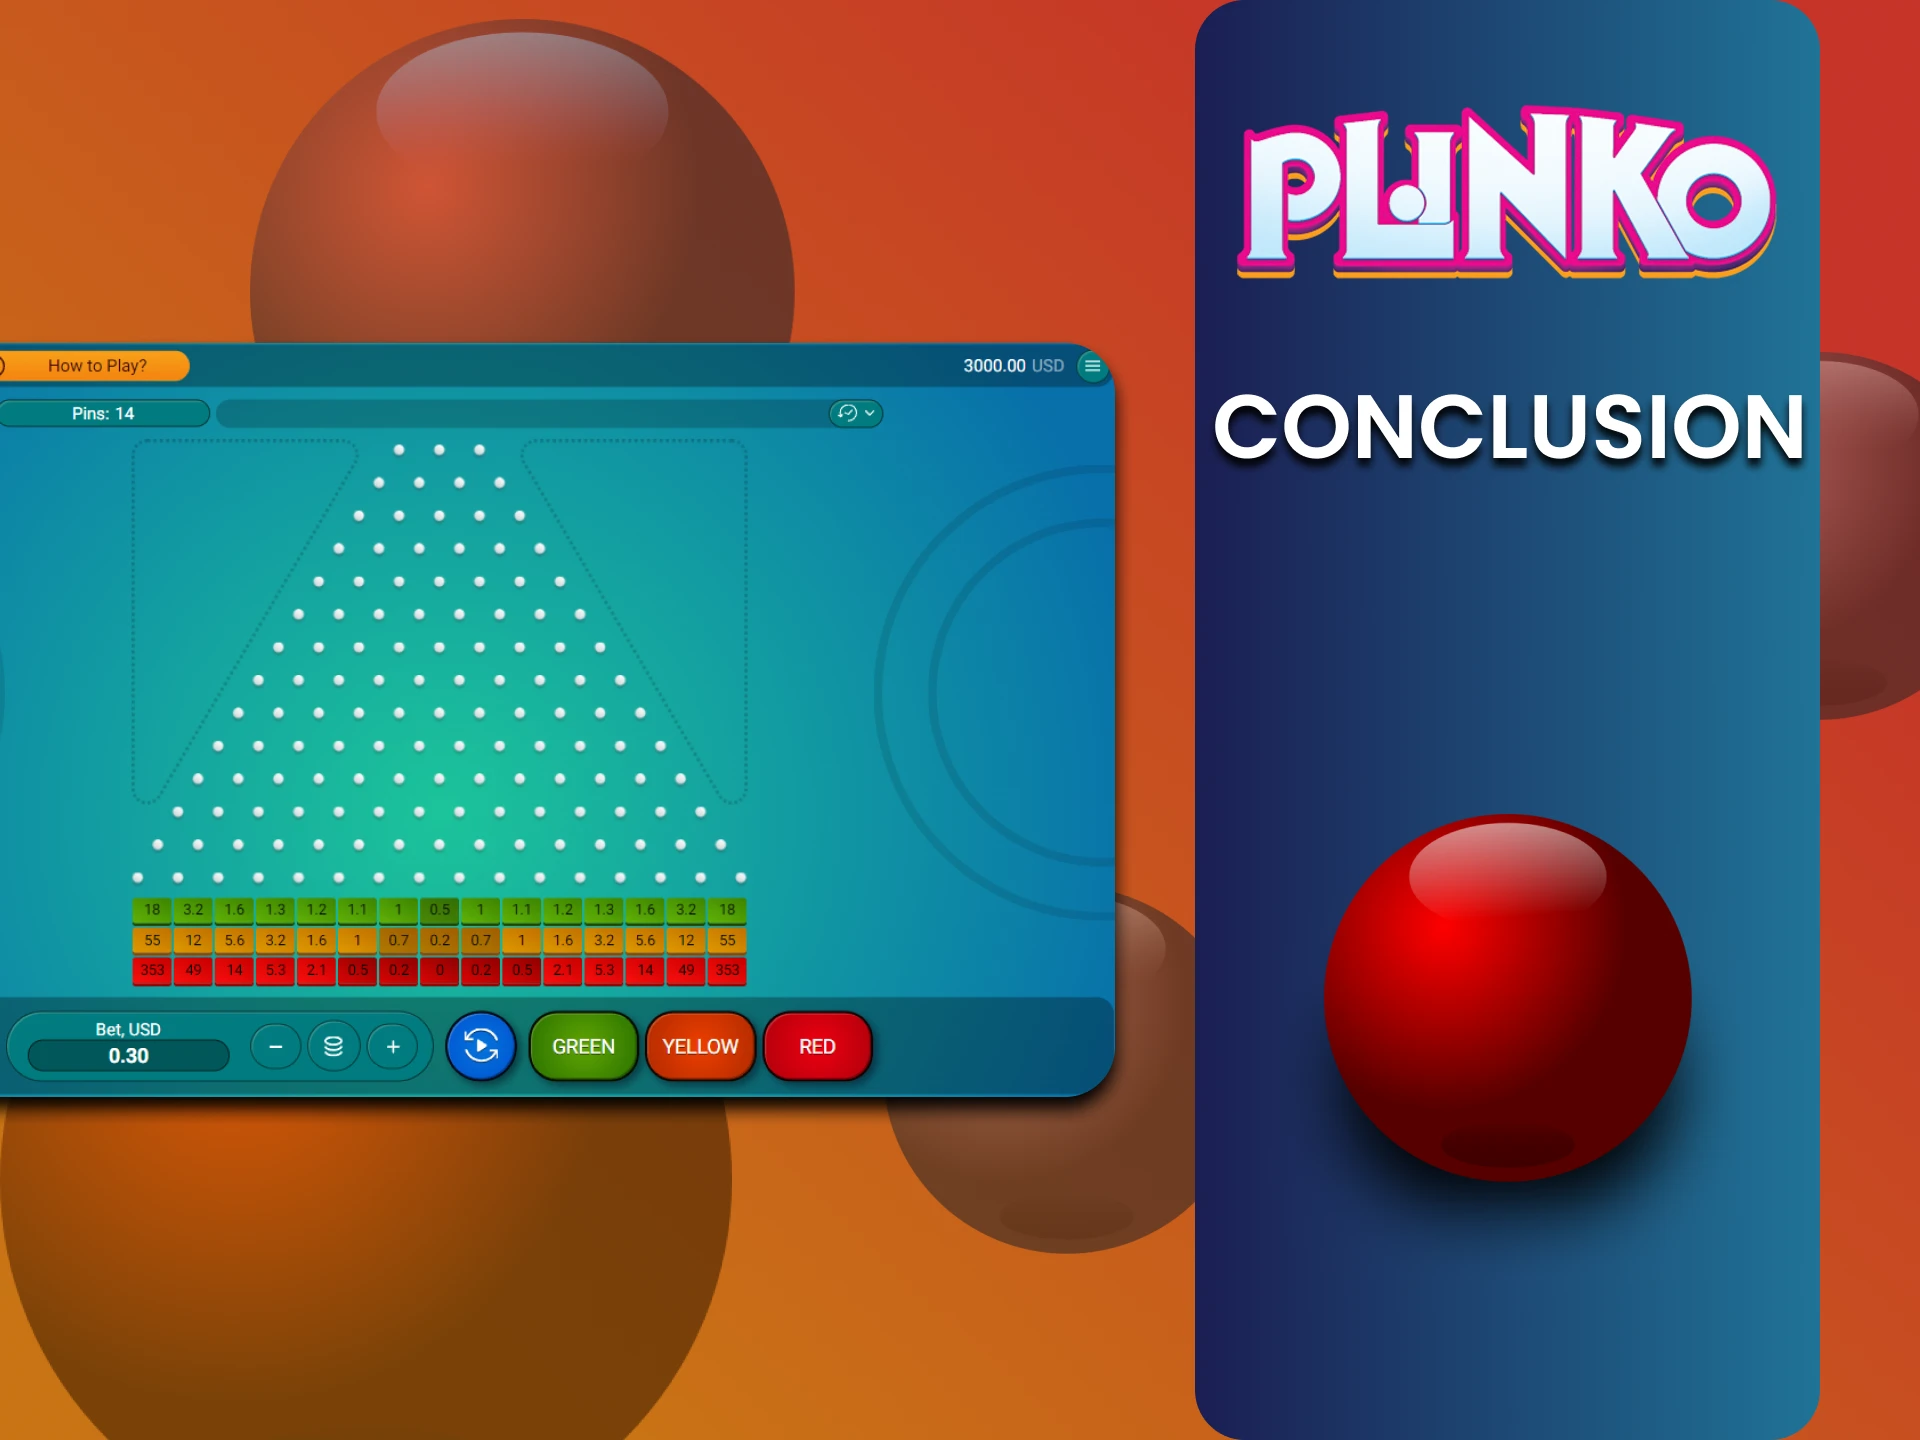 The demo version of the Plinko game will help you at the start of the game.